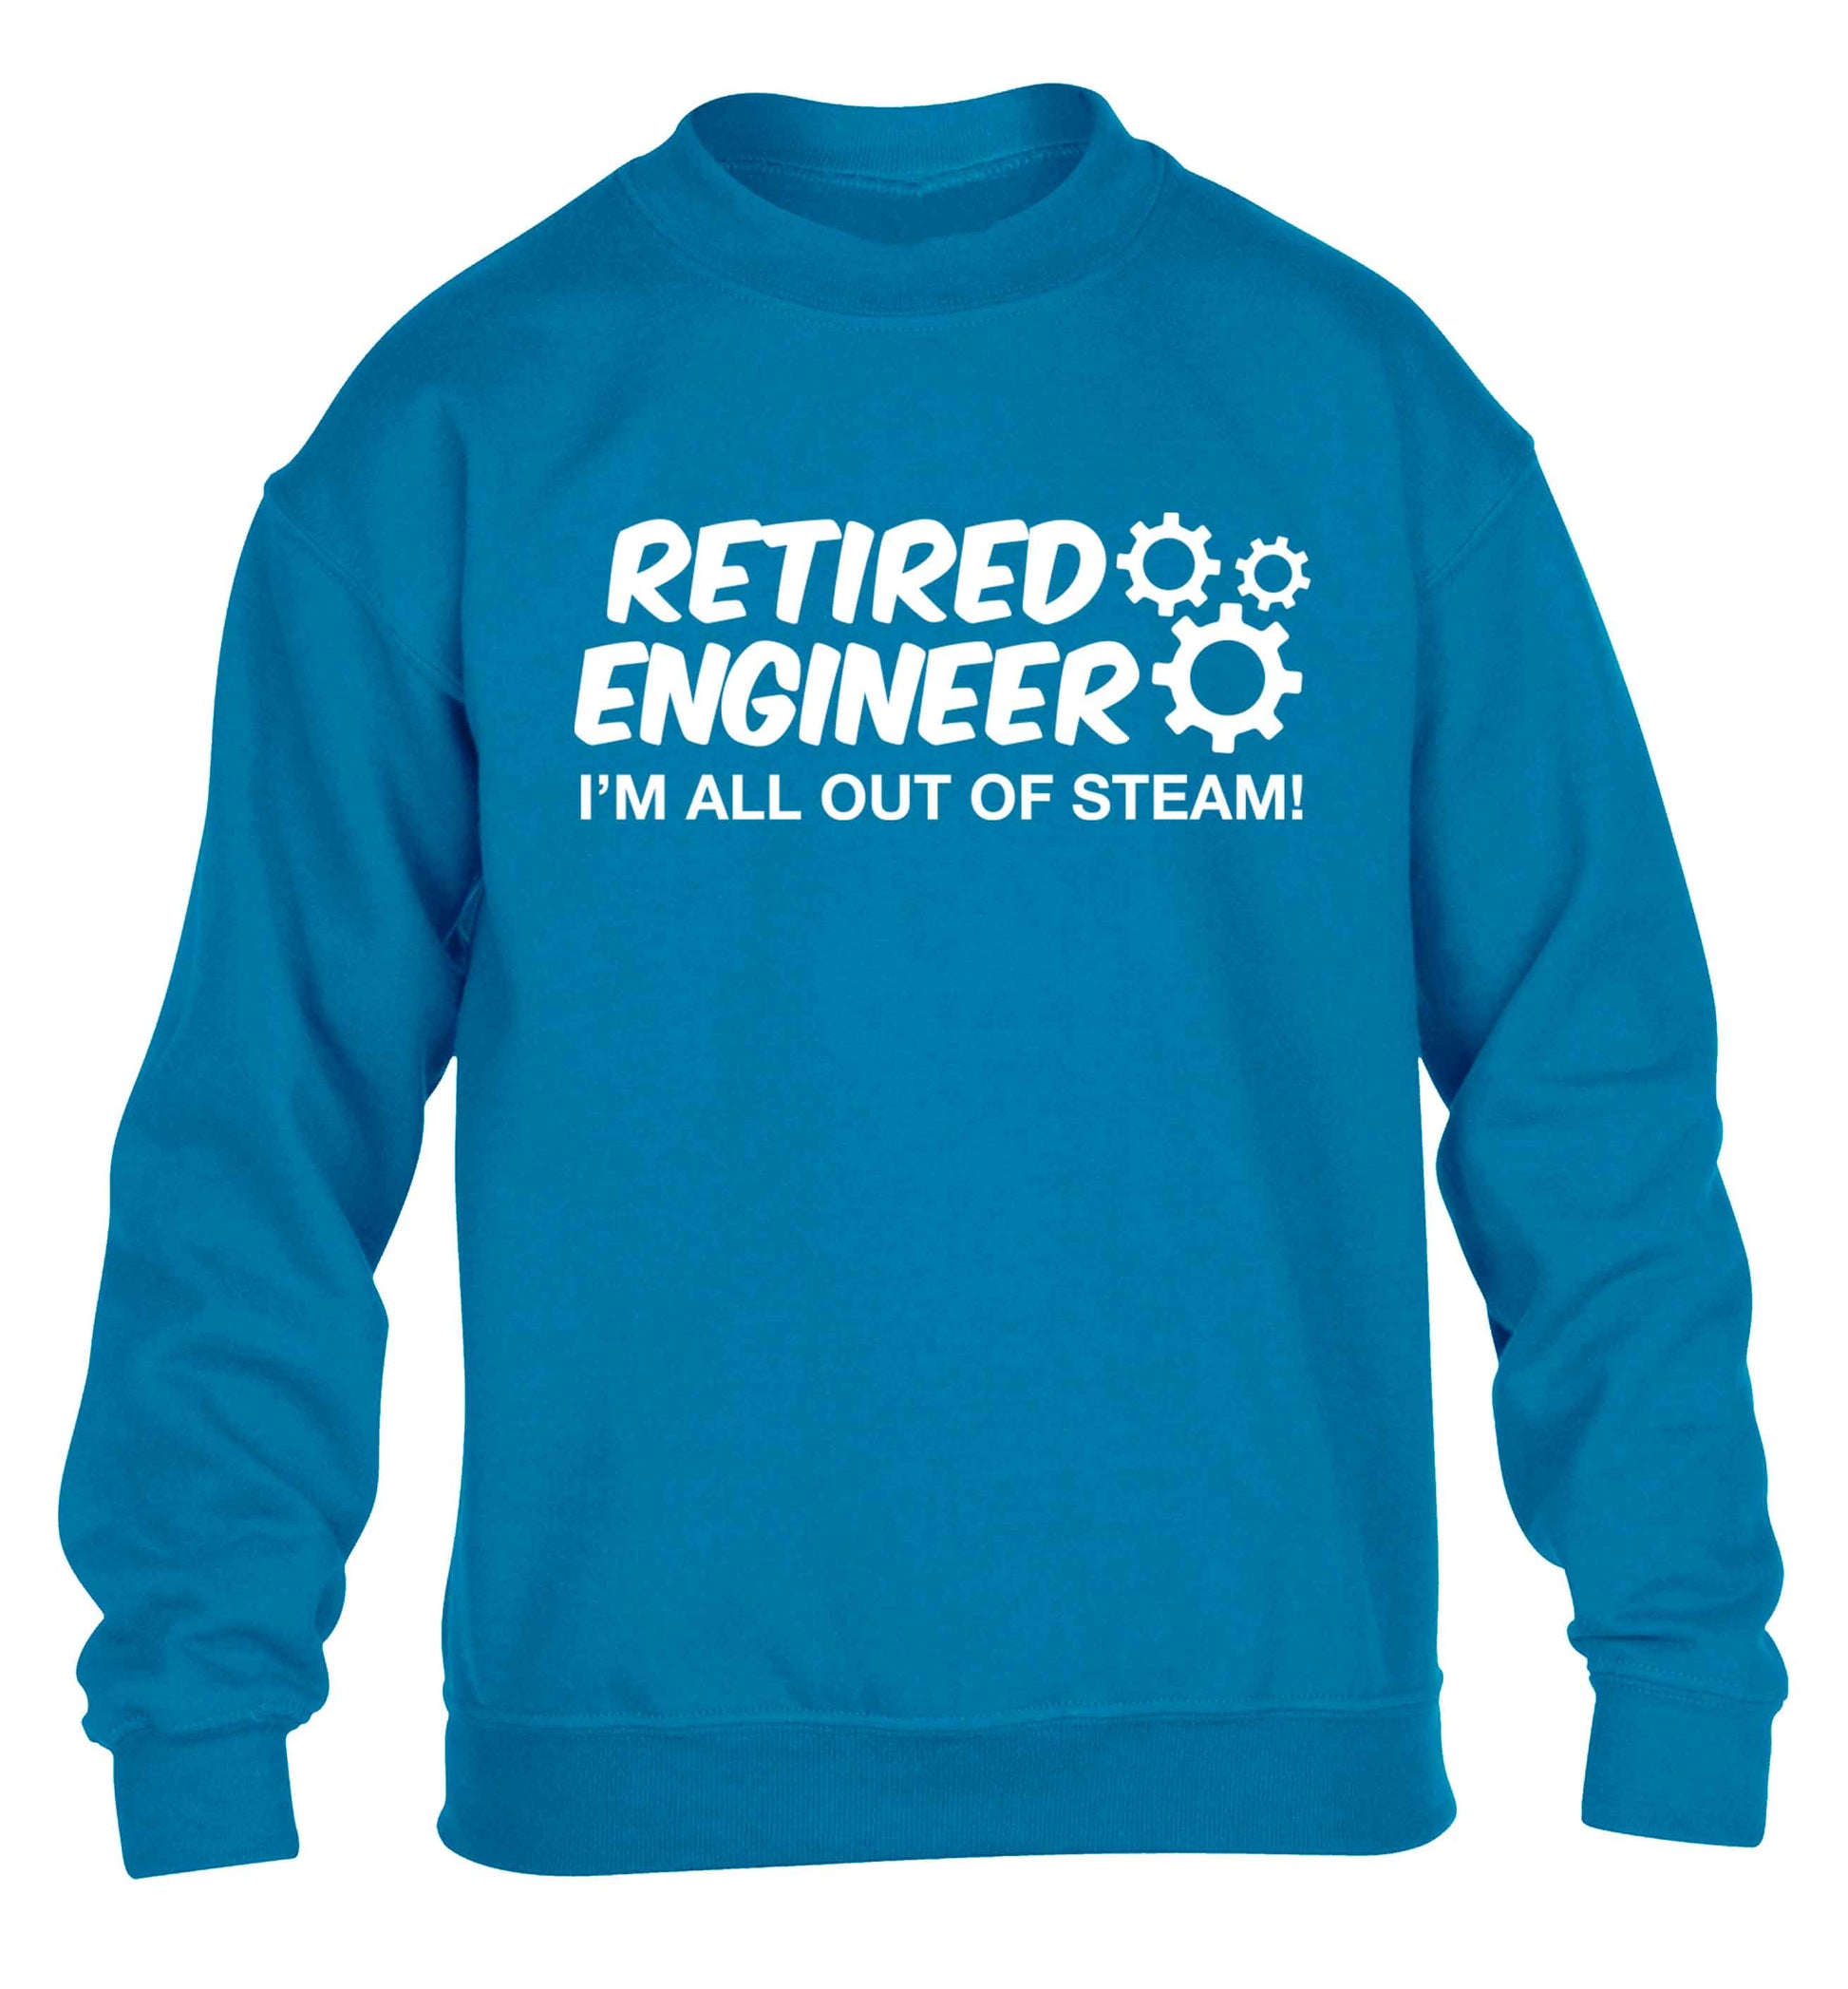 Retired engineer I'm all out of steam children's blue sweater 12-13 Years